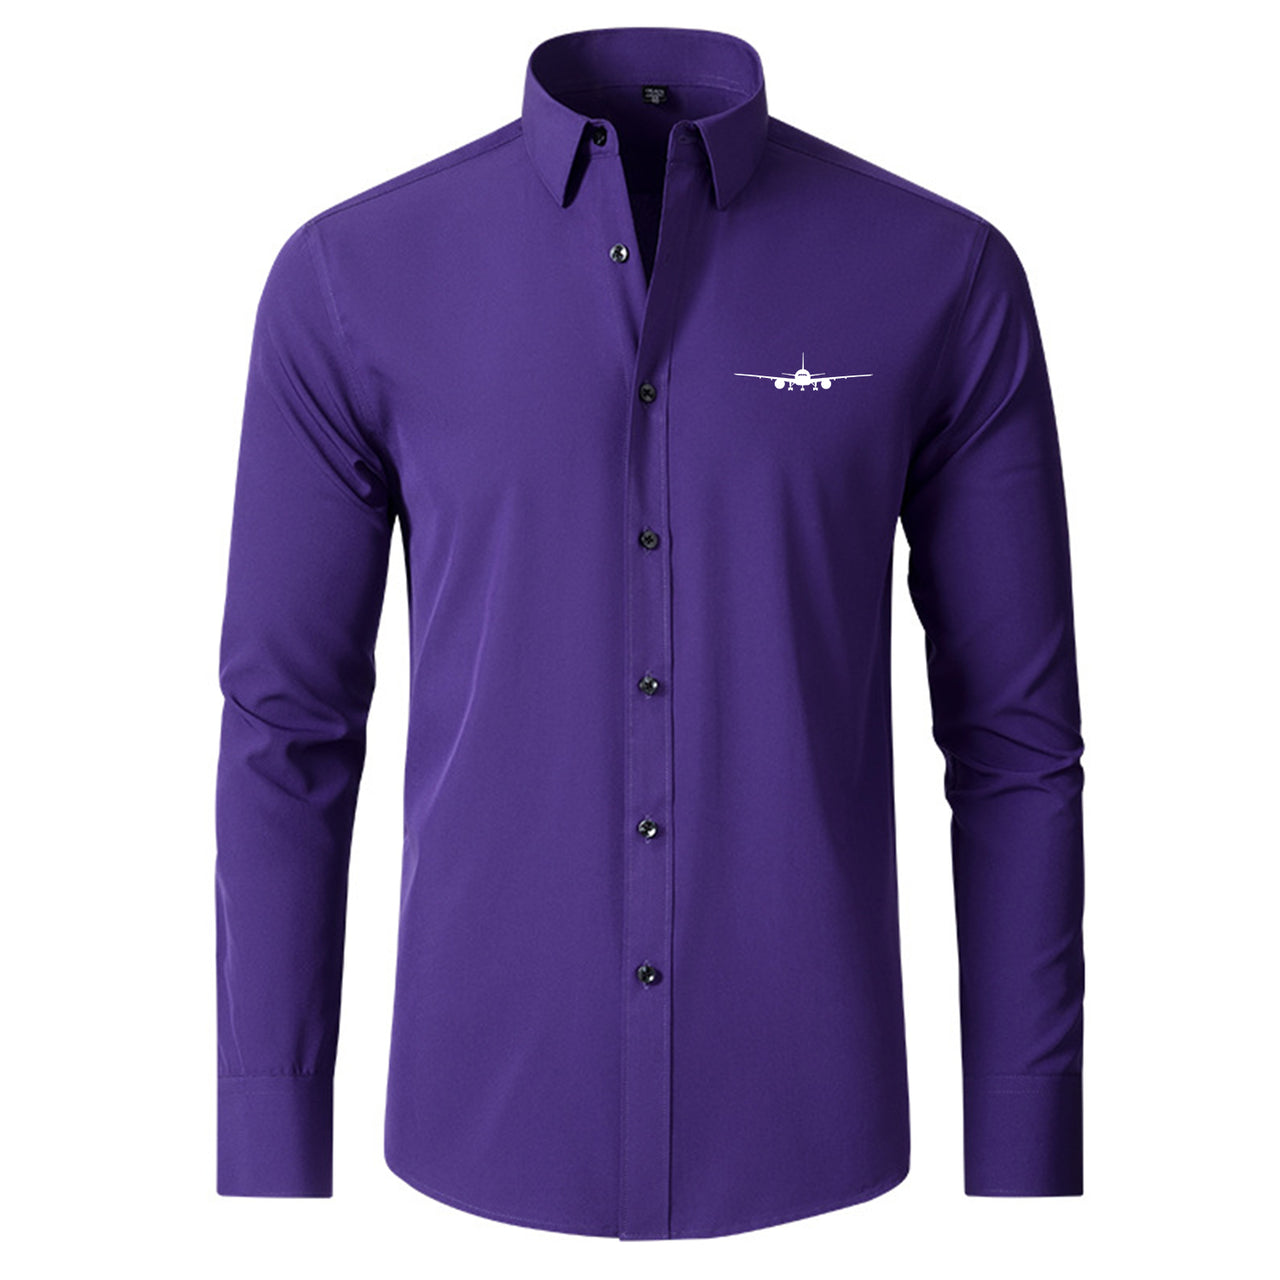 Boeing 777 Silhouette Designed Long Sleeve Shirts